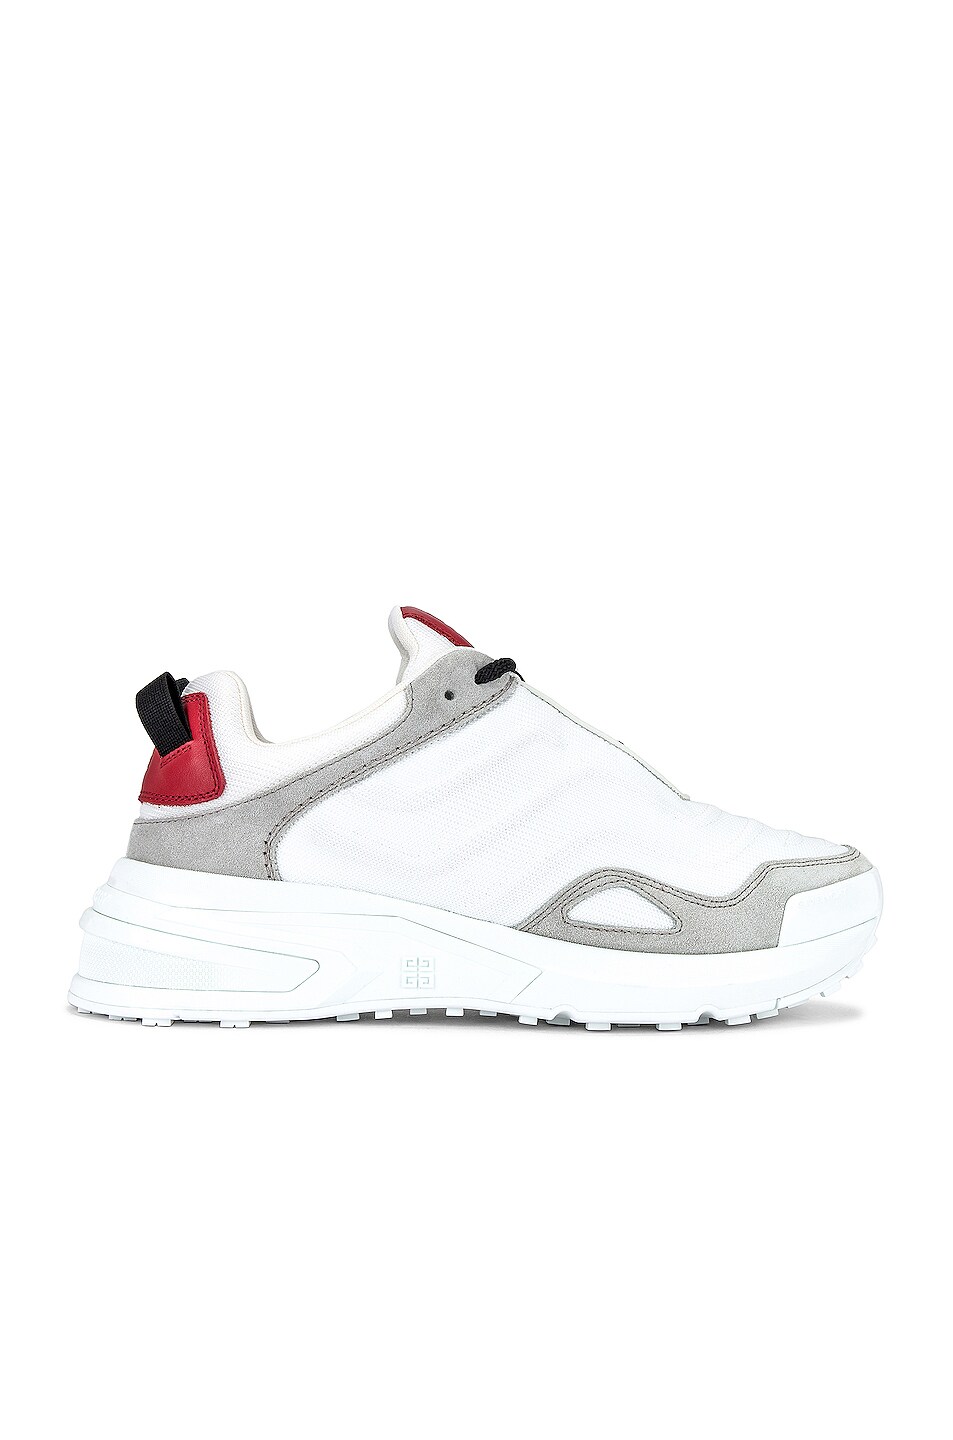 Image 1 of Givenchy Giv 1 Light Runner in Grey White & Red